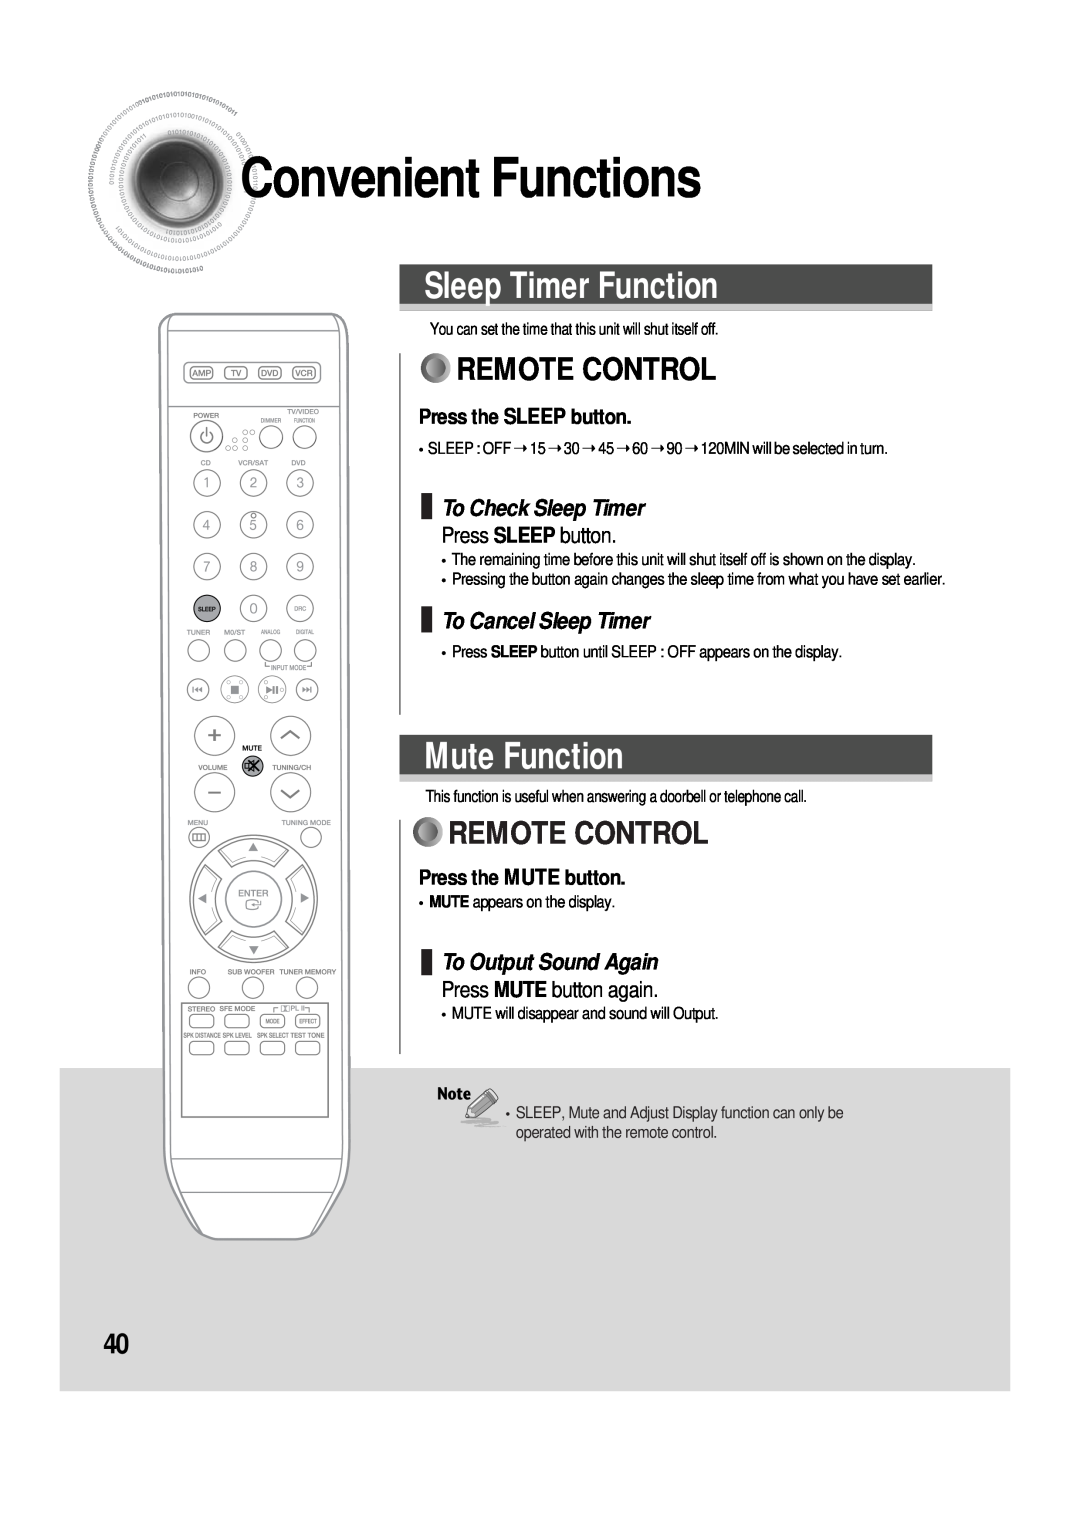 Samsung AV-R610 manual ConvenientFunctions, Sleep Timer Function, Mute Function, Remote Control, To Check Sleep Timer 